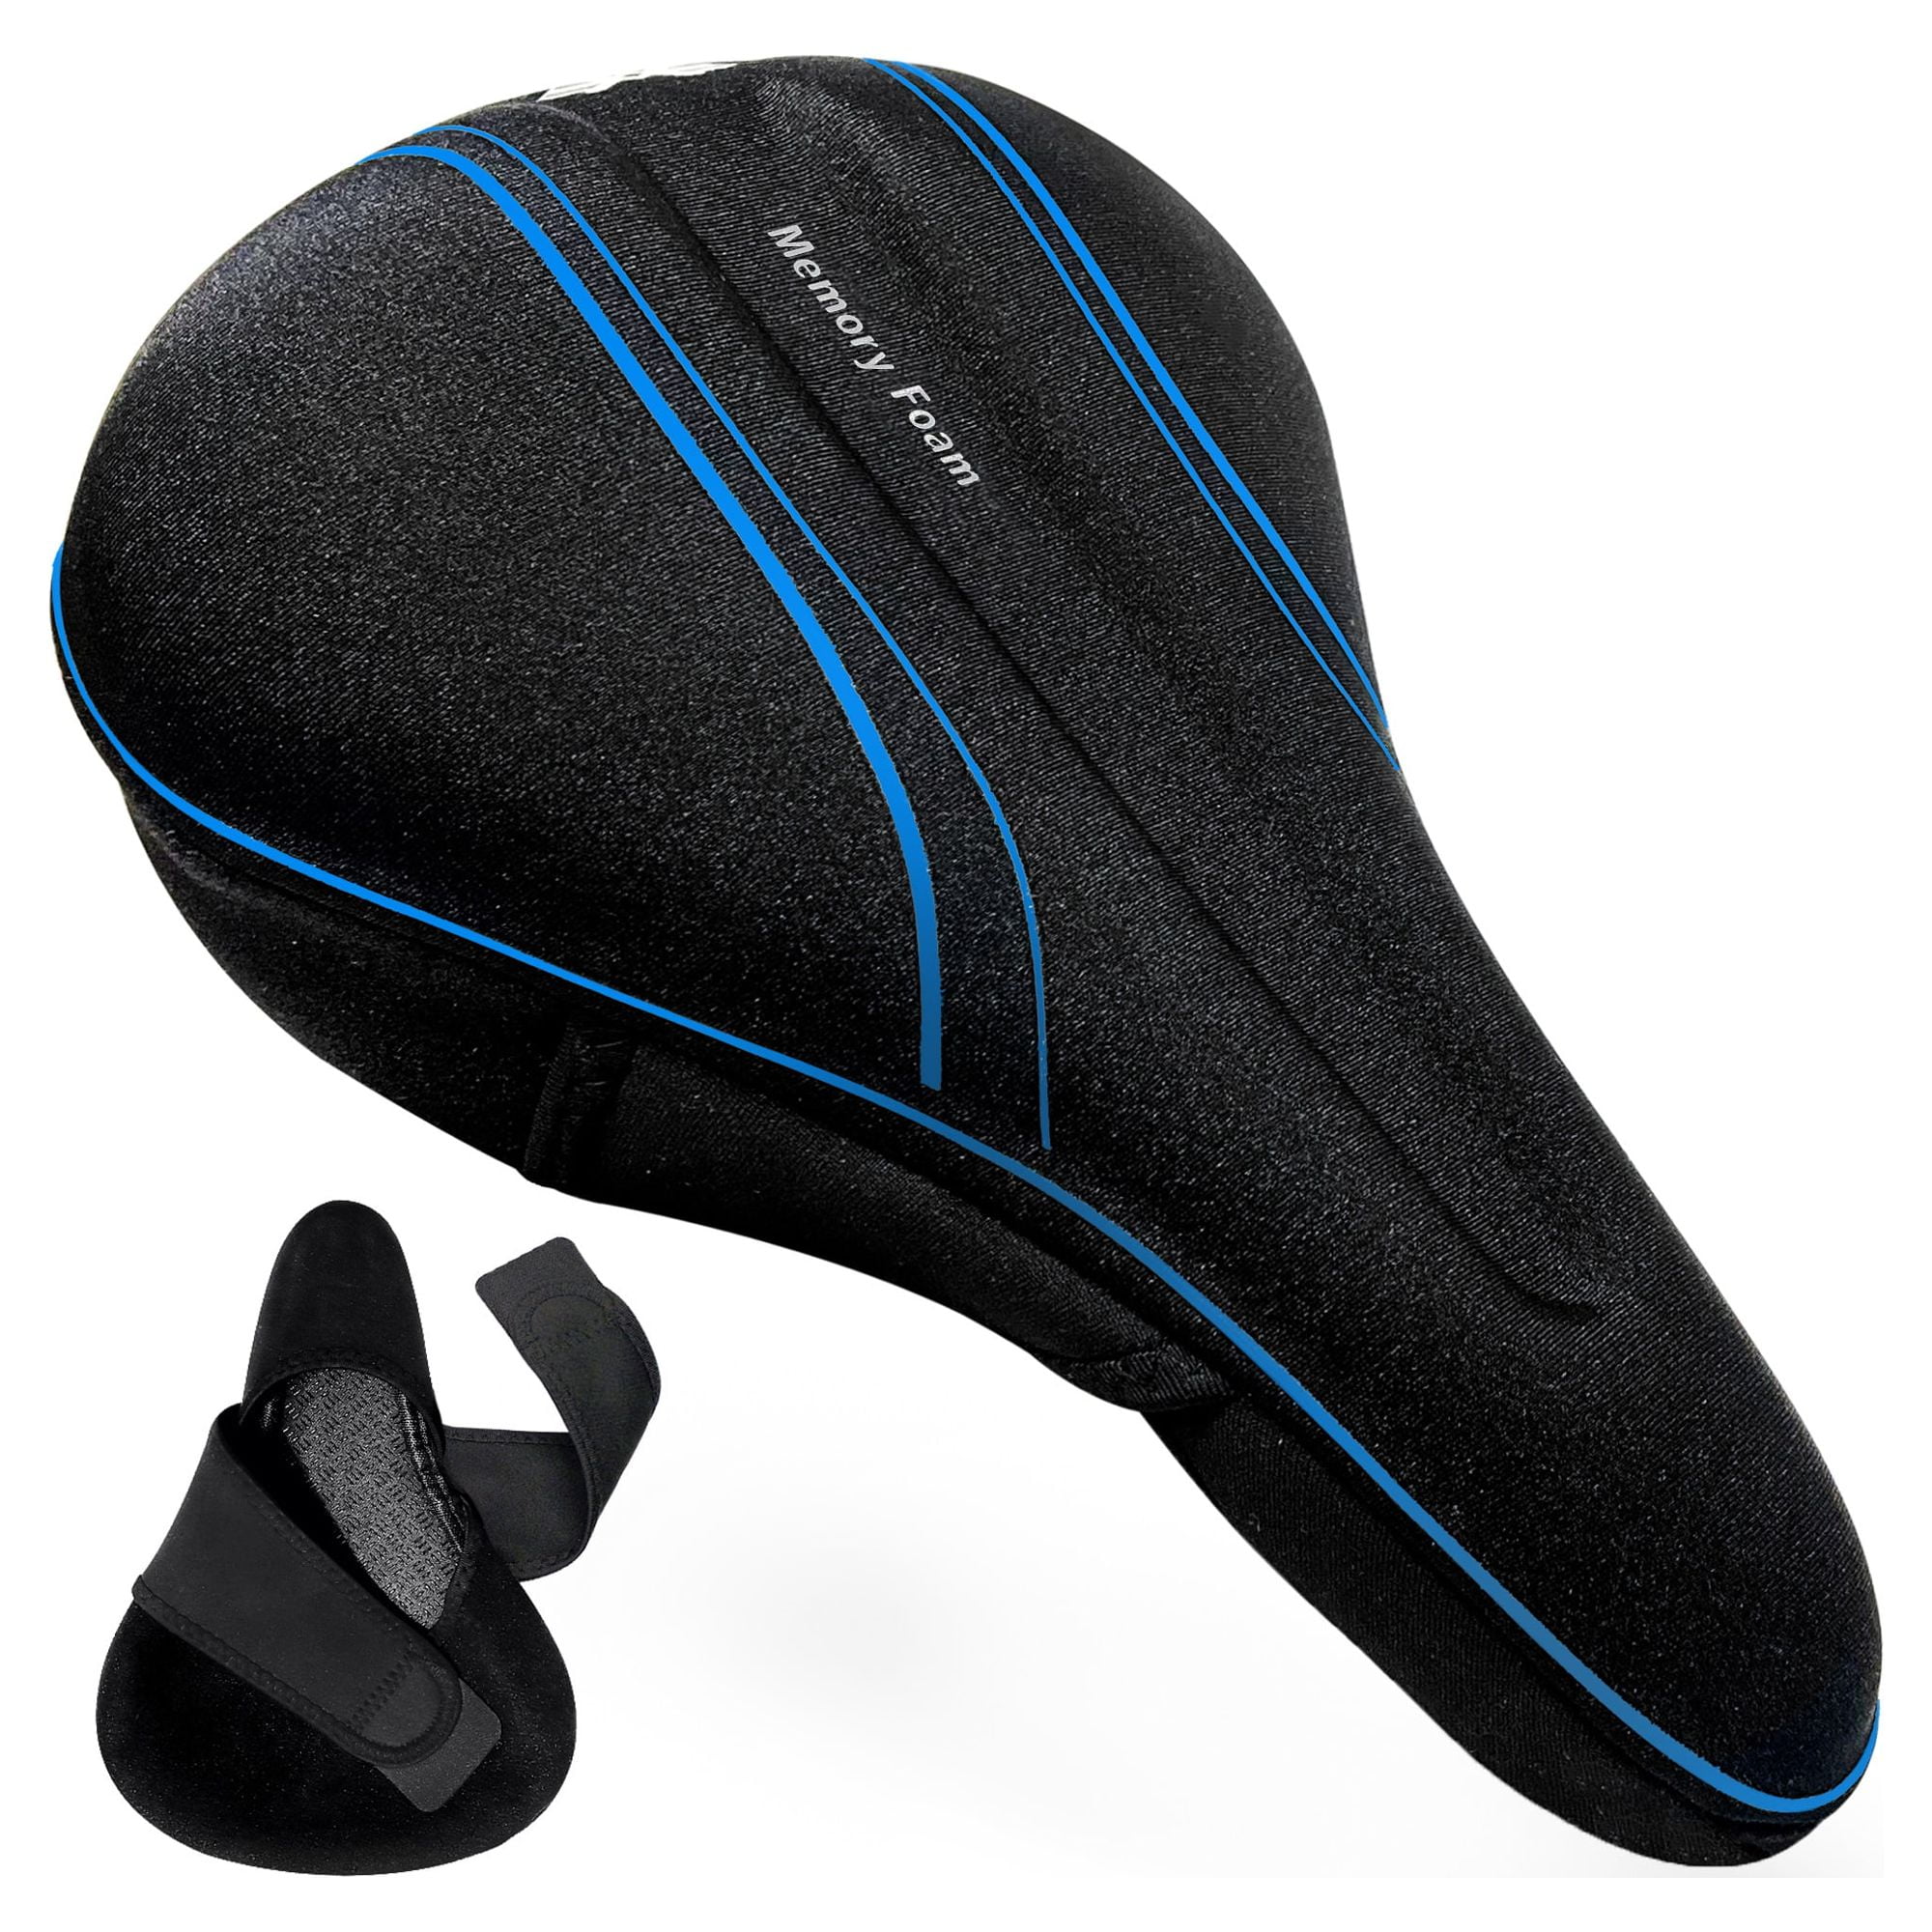 Exercise Bike Seat Cushion with Back Support Replacement Soft Cycling Bicycle  Saddle Cover for Recumbent Bike Adult Bicycle